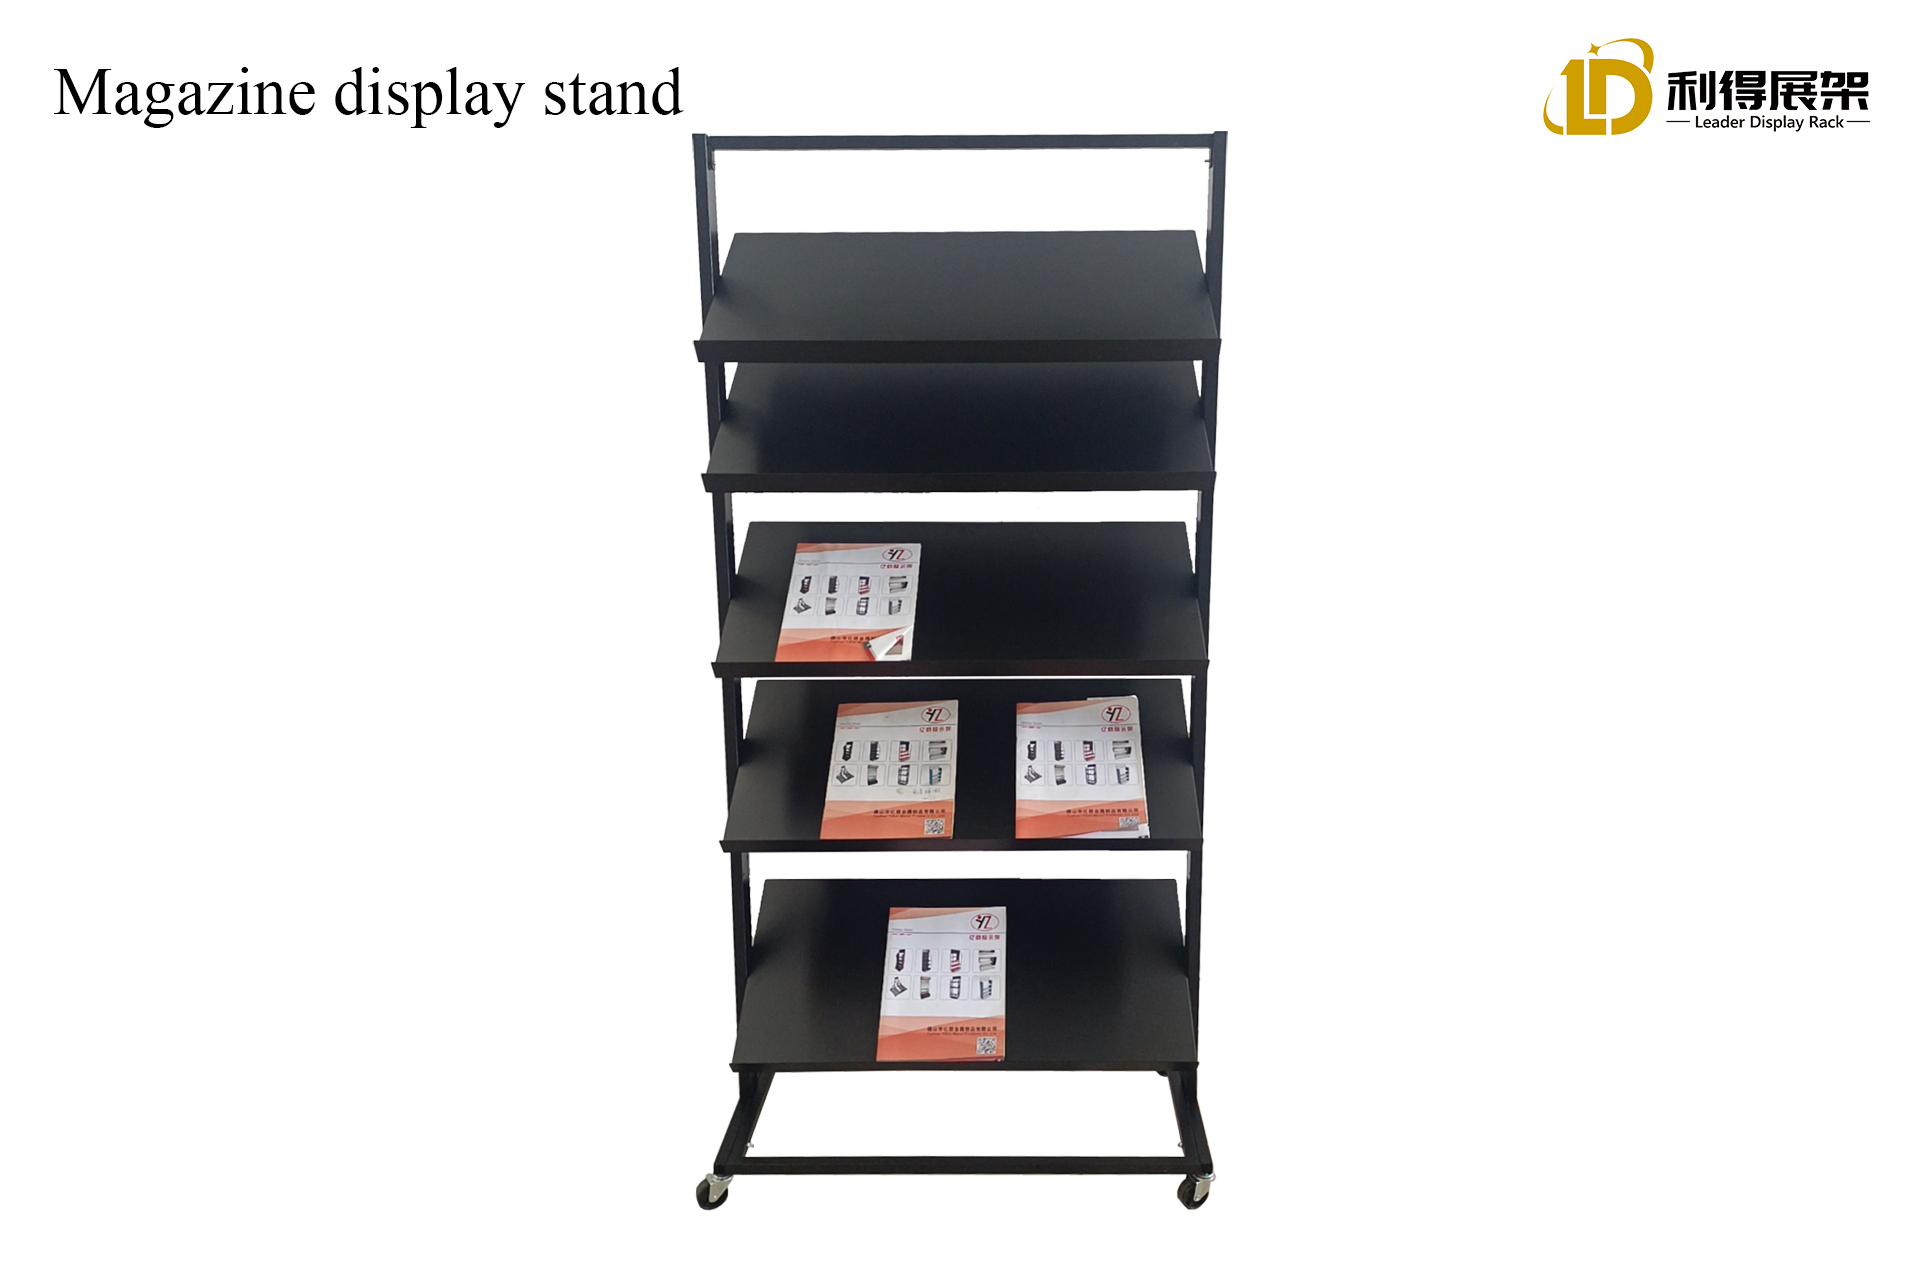 How To Choose The Right Magazine Display Stand, The Combination of Function And Aesthetics